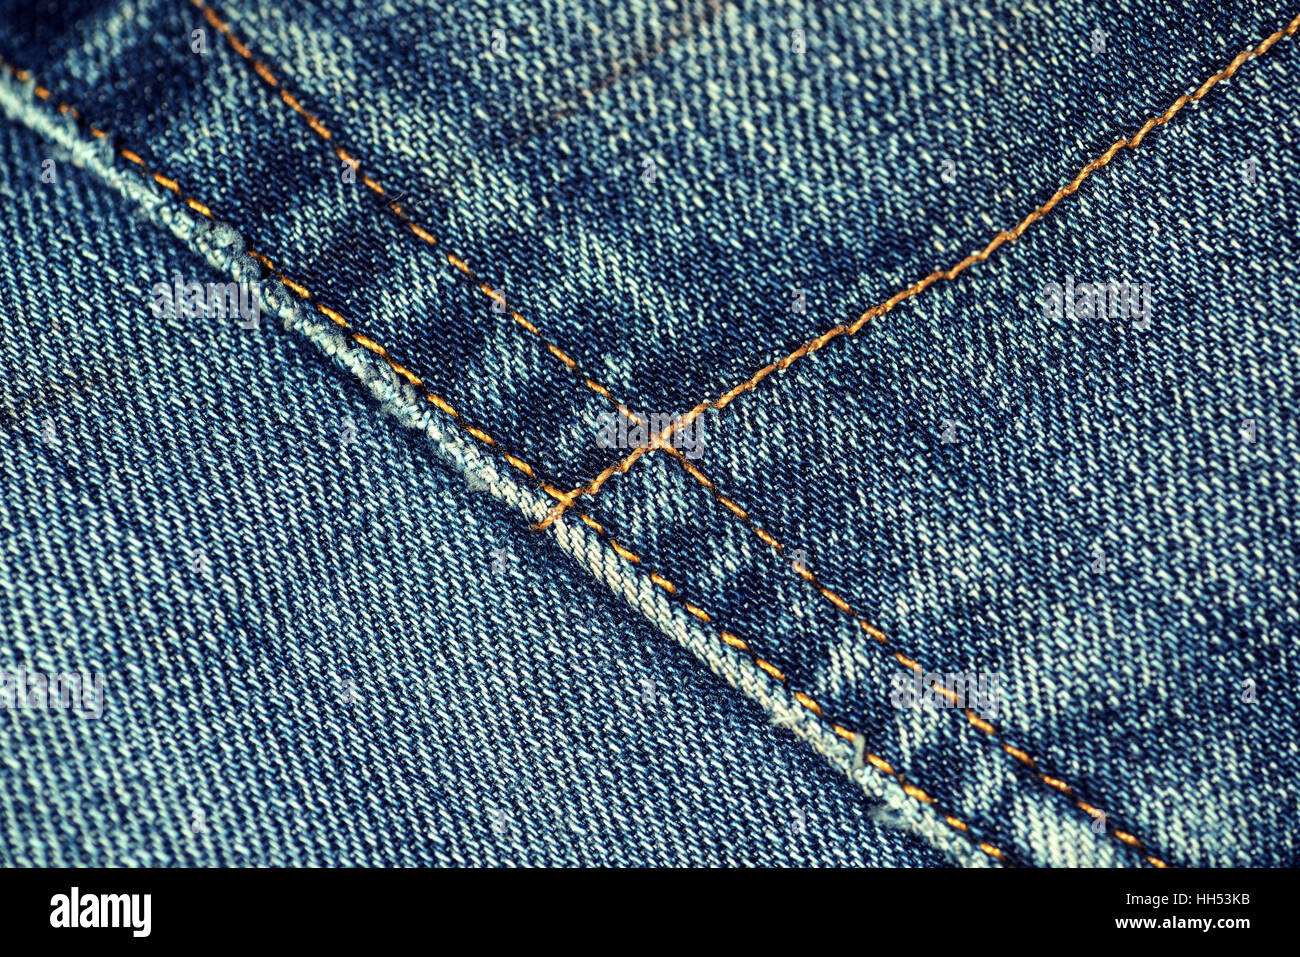 Macro closeup of yellow stitch on a pair of faded denim jeans with worn pocket edges. Stock Photo